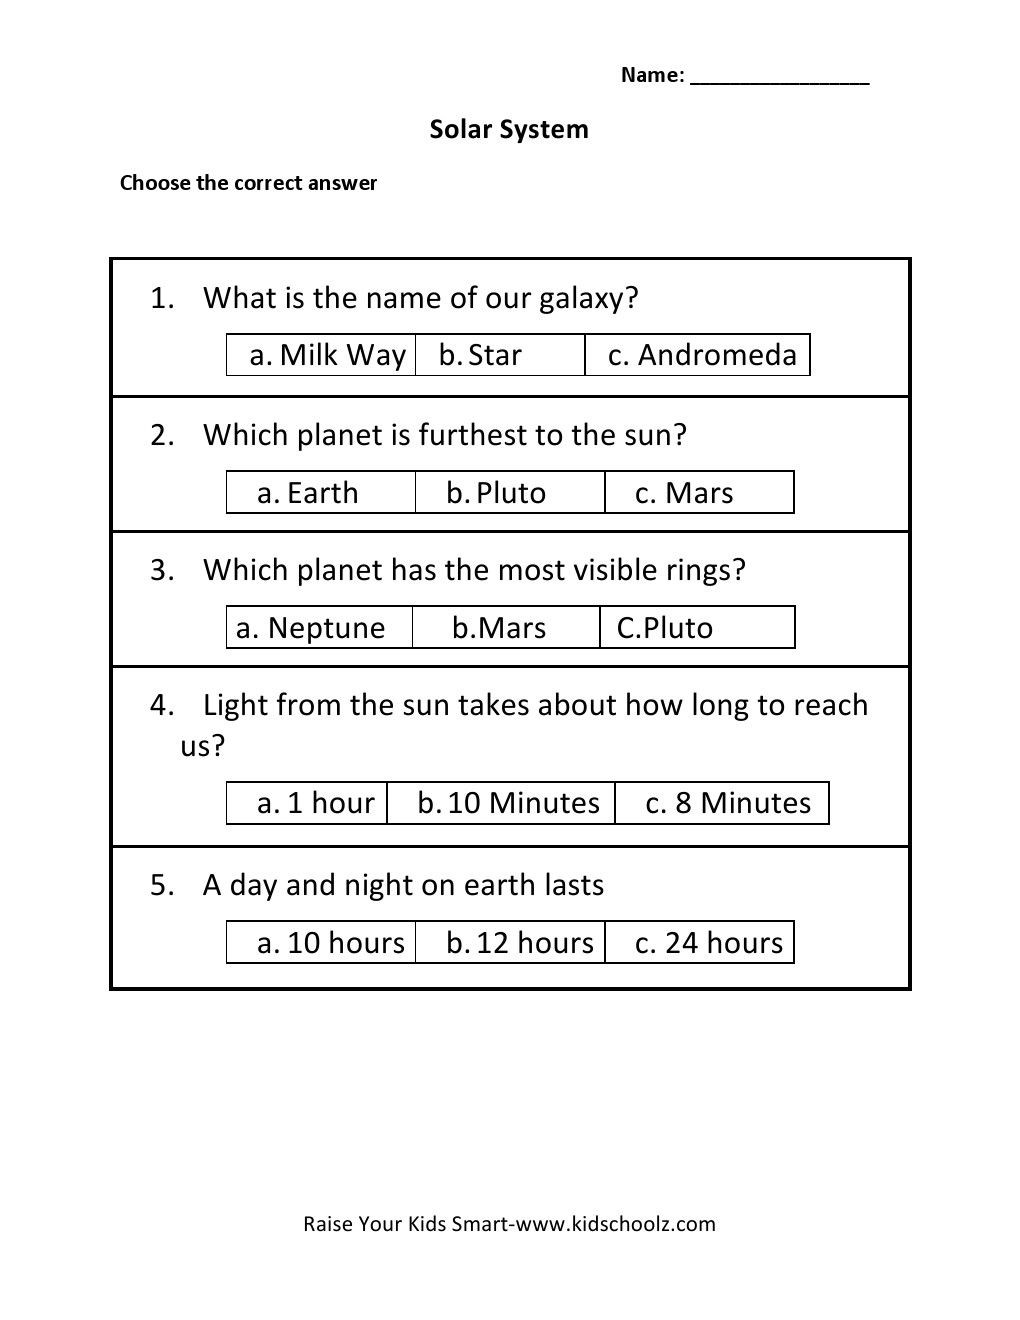 Solar System Worksheets 5th Grade Science Worksheets for 5th Grade the Earth